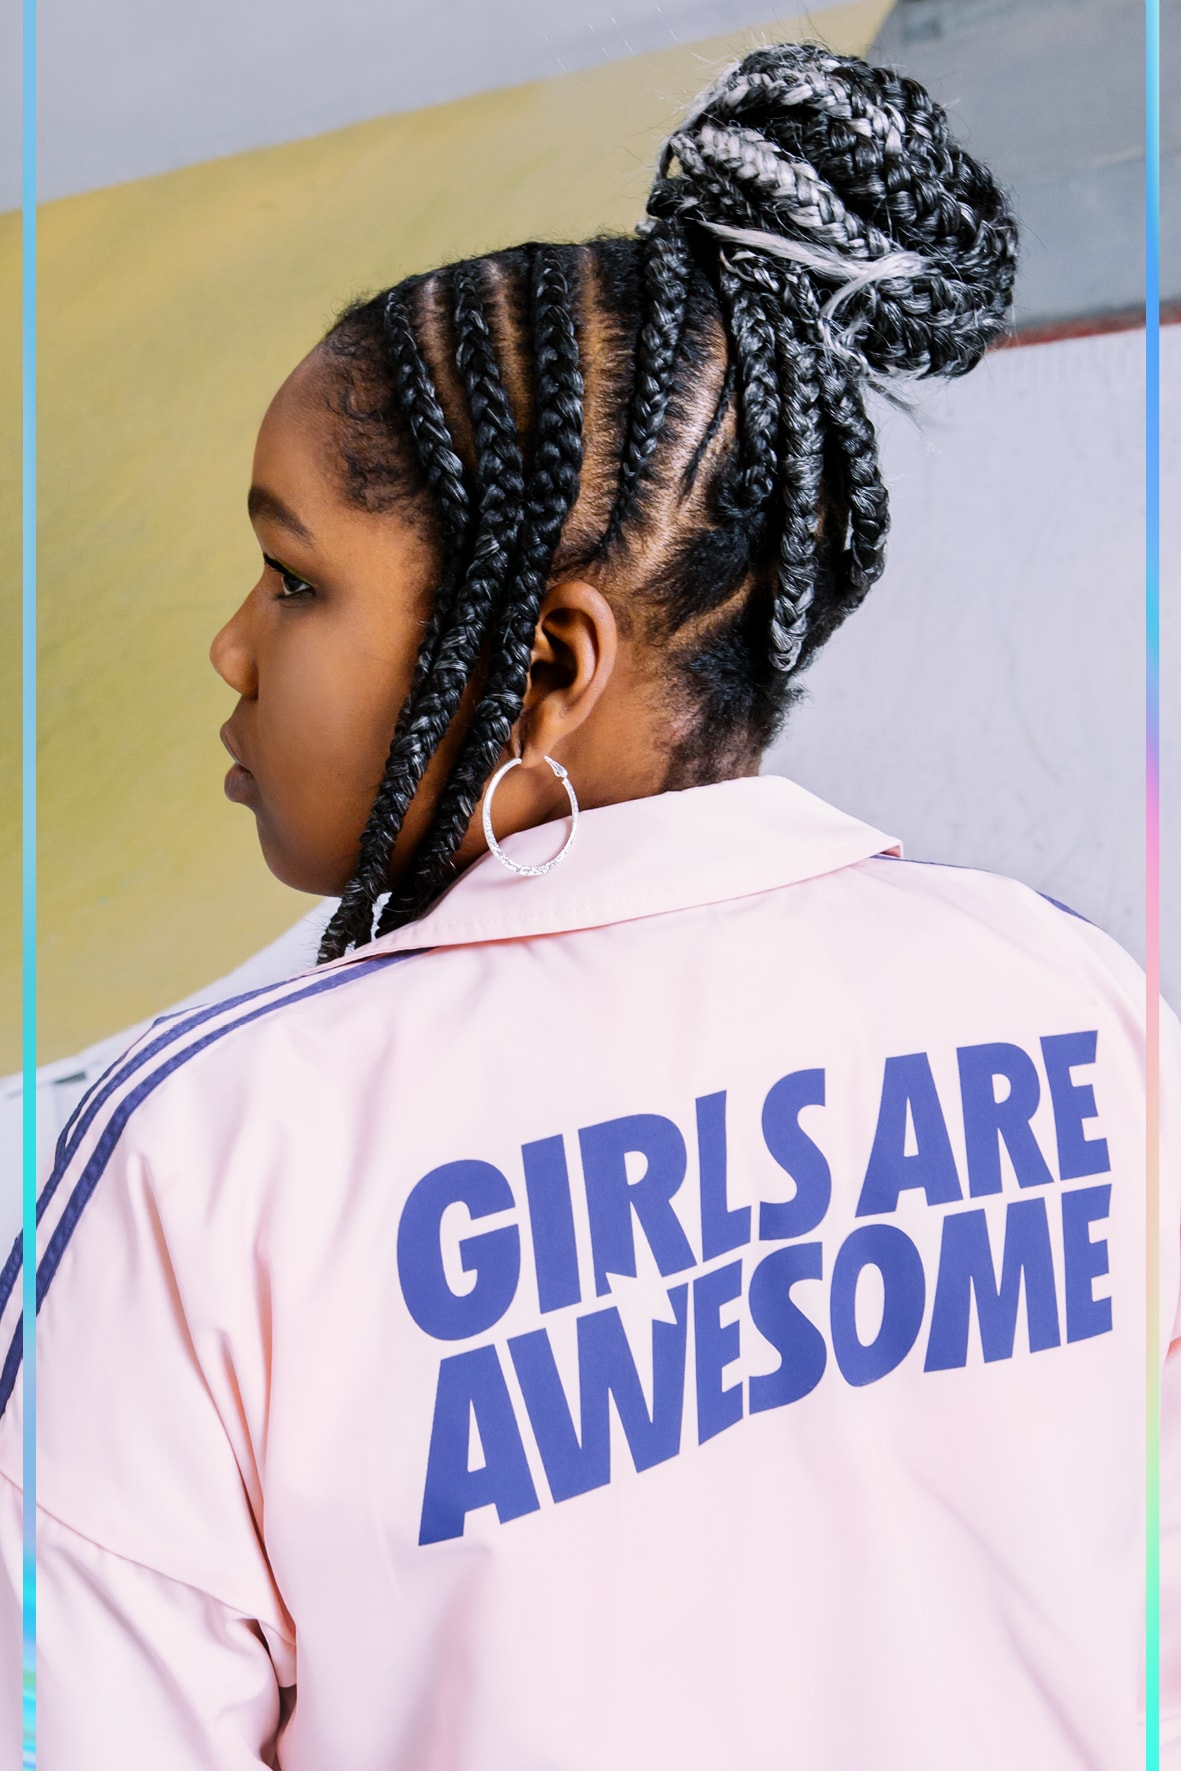 Girls Are Awesome x adidas Originals Capsule Collection